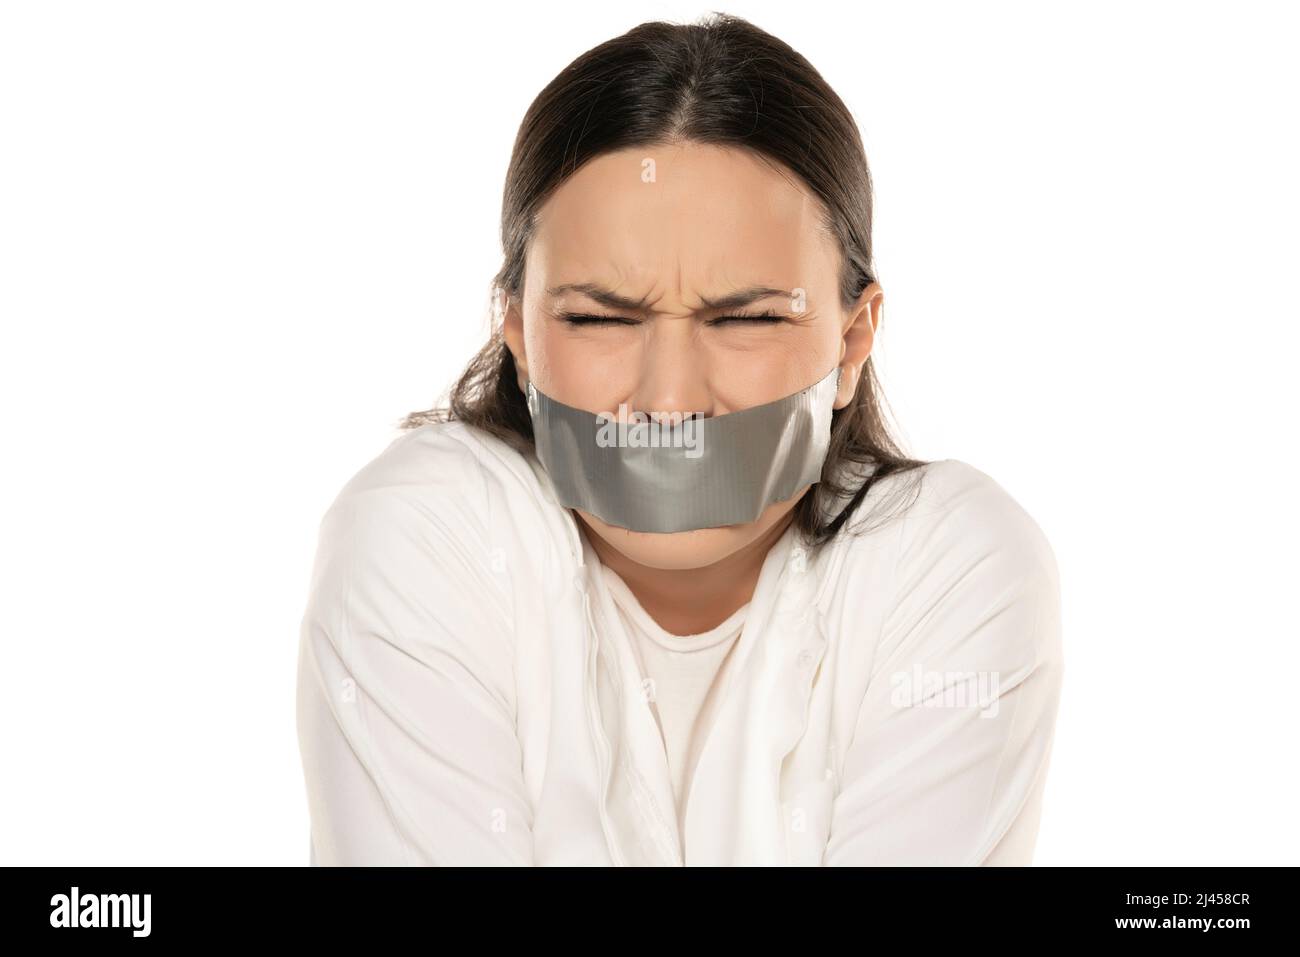 Unhappy and desperate young woman with adhesive tape over her mouth Stock Photo